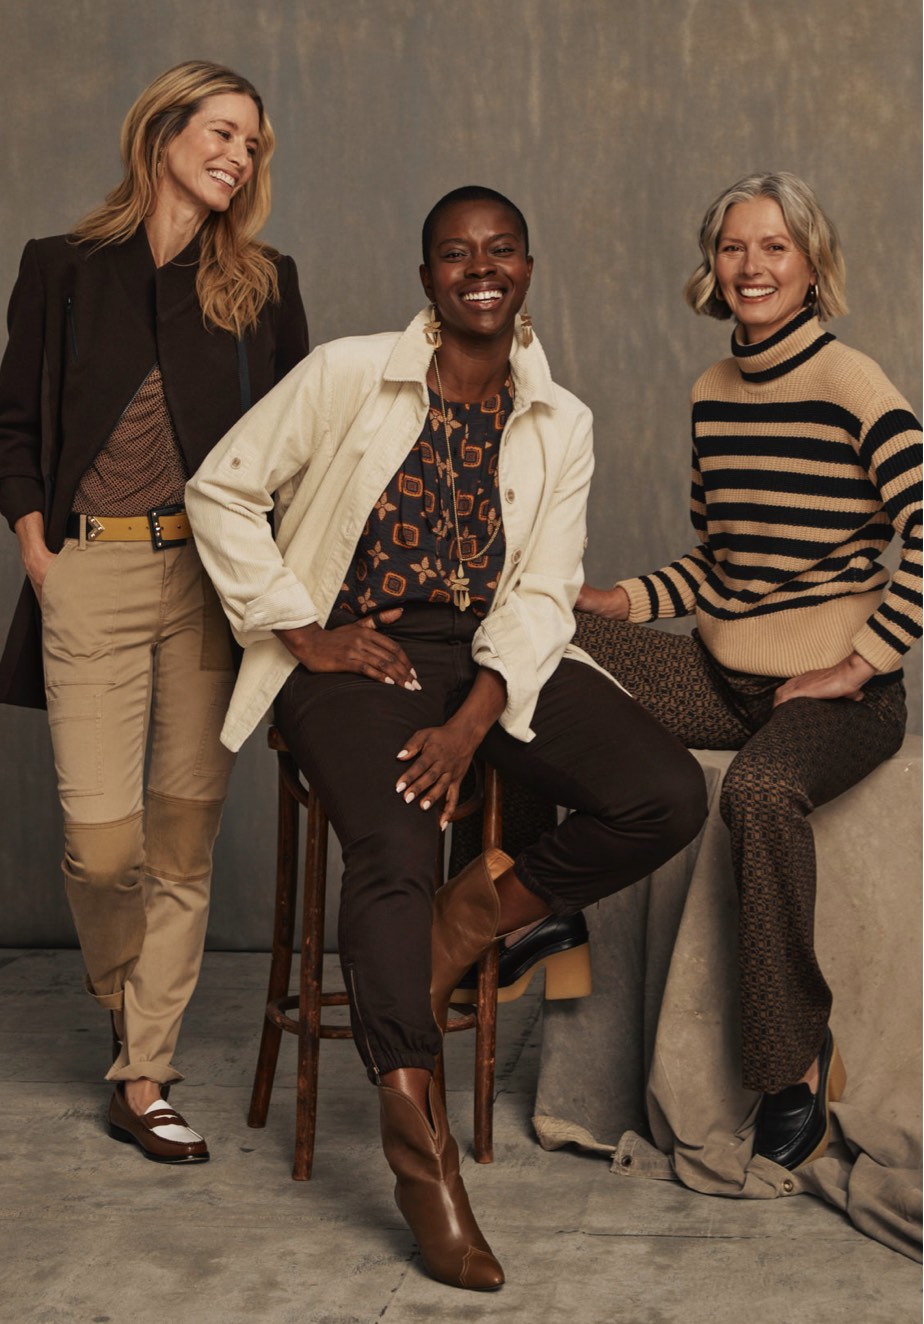 First model is wearing Sassy Top in Tile Print, Legacy Topper in Dark Chocolate, Captain Pant in Khaki, and Ornament Belt in Black Combo.Second model is wearing Louis Top in Medallion Print, Scout Jacket in Bone, and Compass Pant in Dark Chocolate. Third model is wearing Polo Turtleneck in Black and Cream and Director Trouser in Multi.